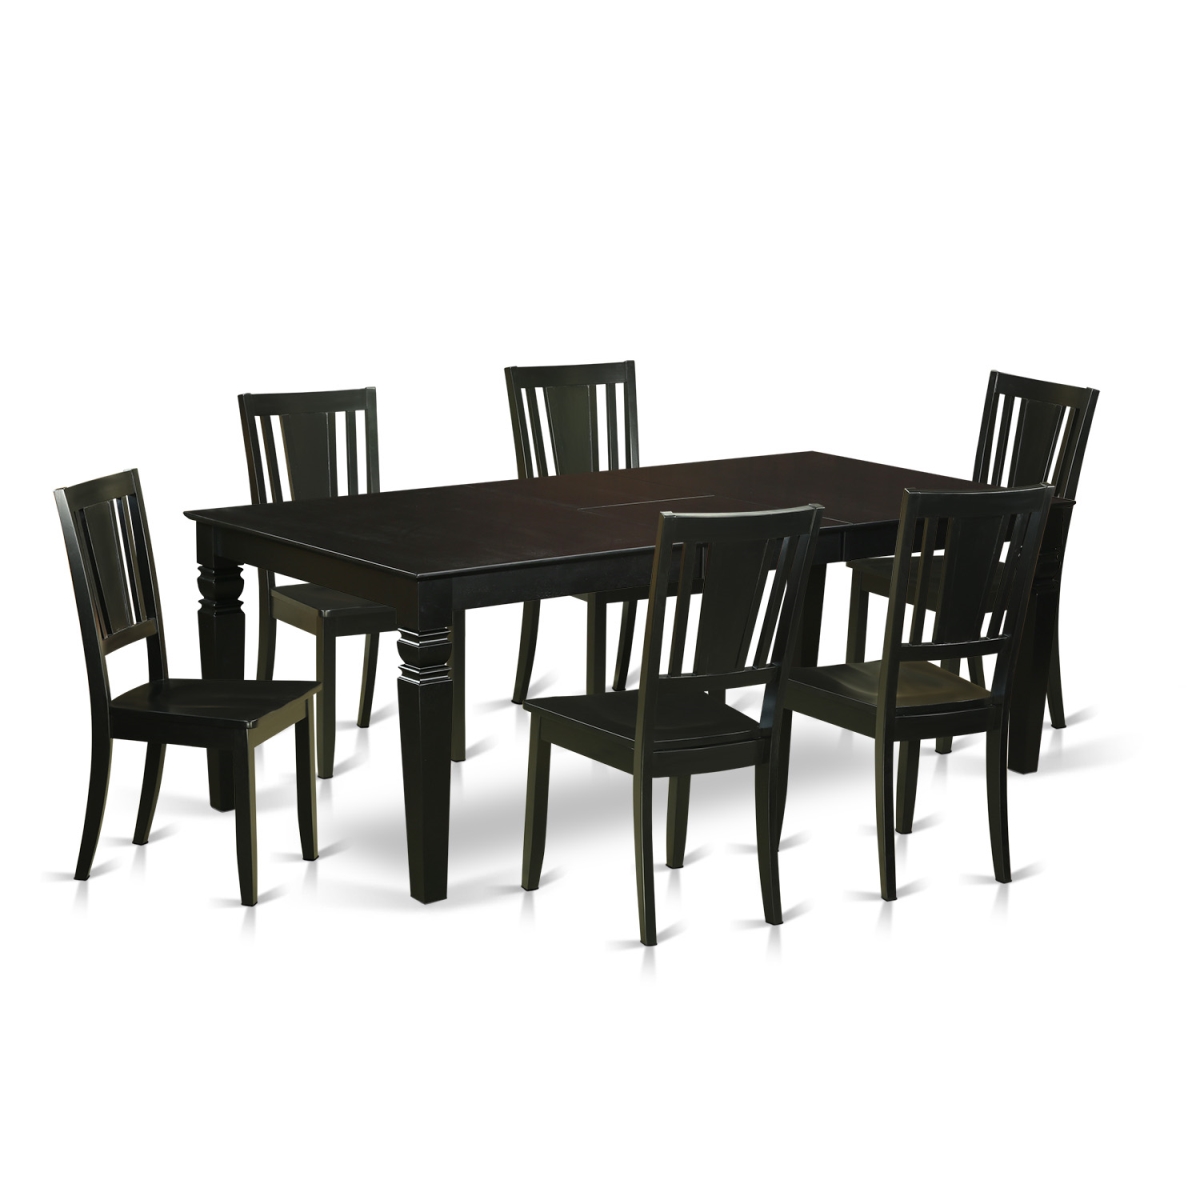 LGDU7-BLK-W Dinette Set with One Logan Dining Room Table & Six Solid Wood Chairs, Rich Black - 7 Piece -  East West Furniture